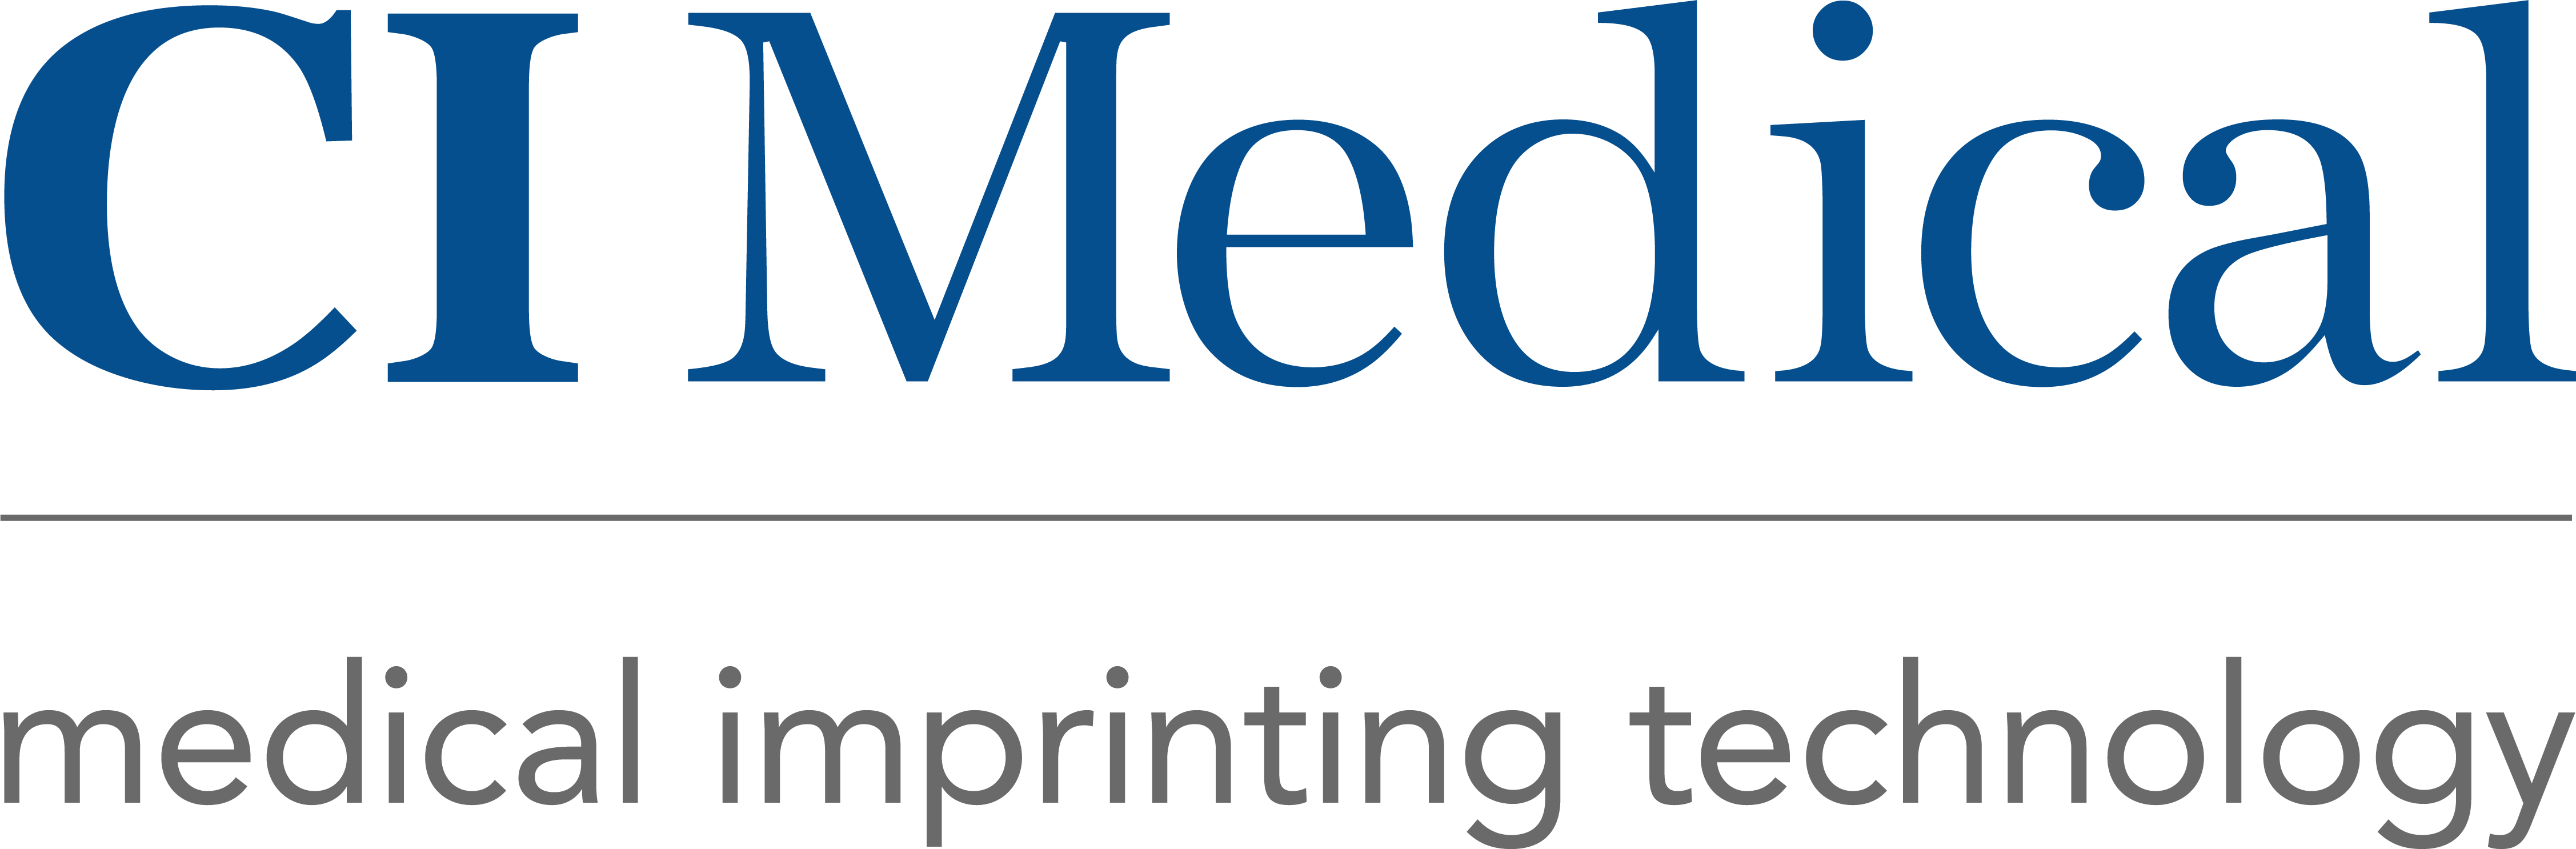 The new logo for CI Medical, Inc.